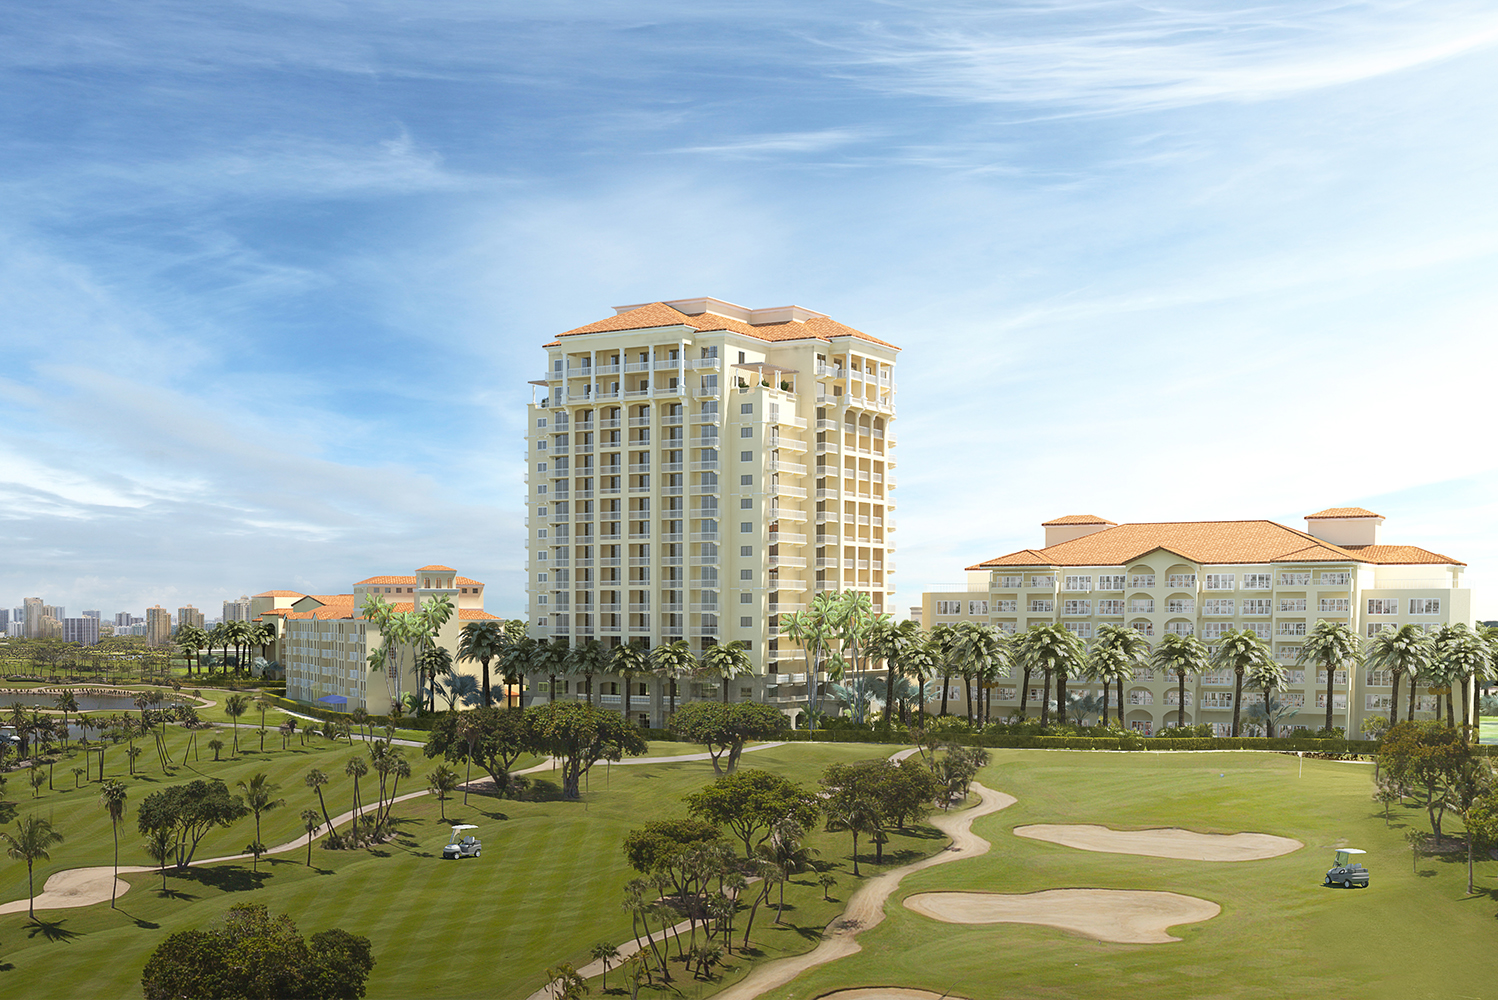 Turnberry Associates and Marriott International will reopen Turnberry Isle Miami as part of the JW Marriott portfolio in Wint